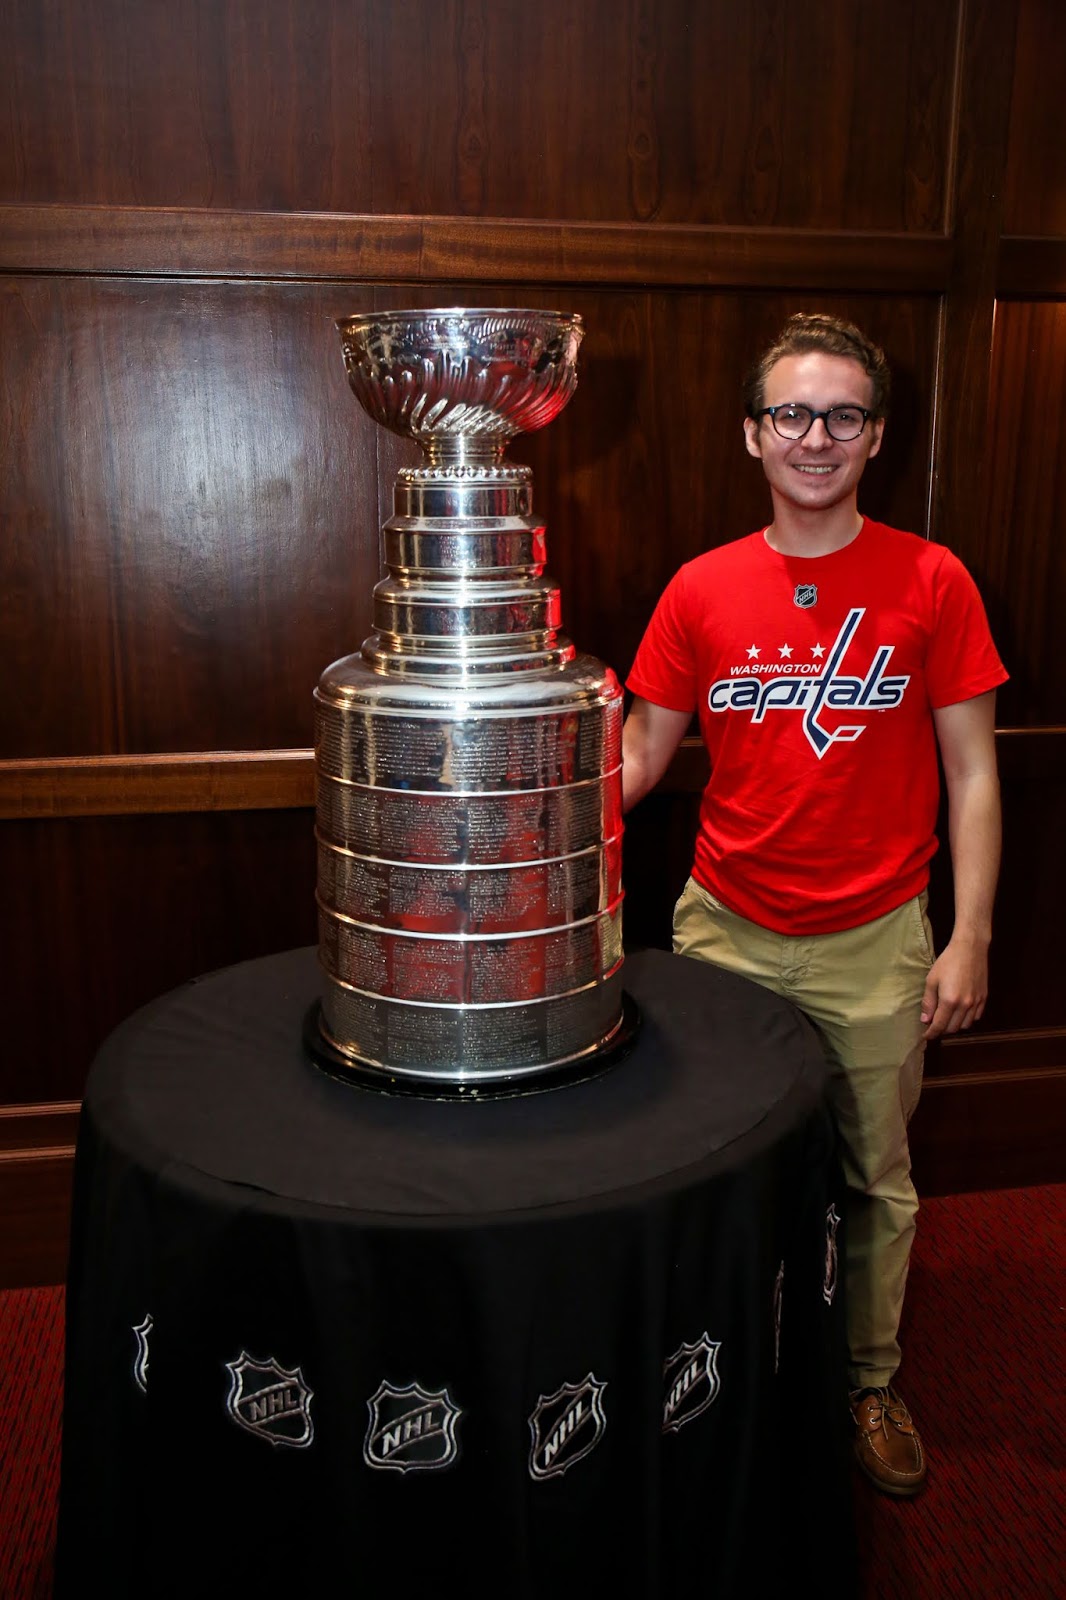 I KISSED THE STANLEY CUP!